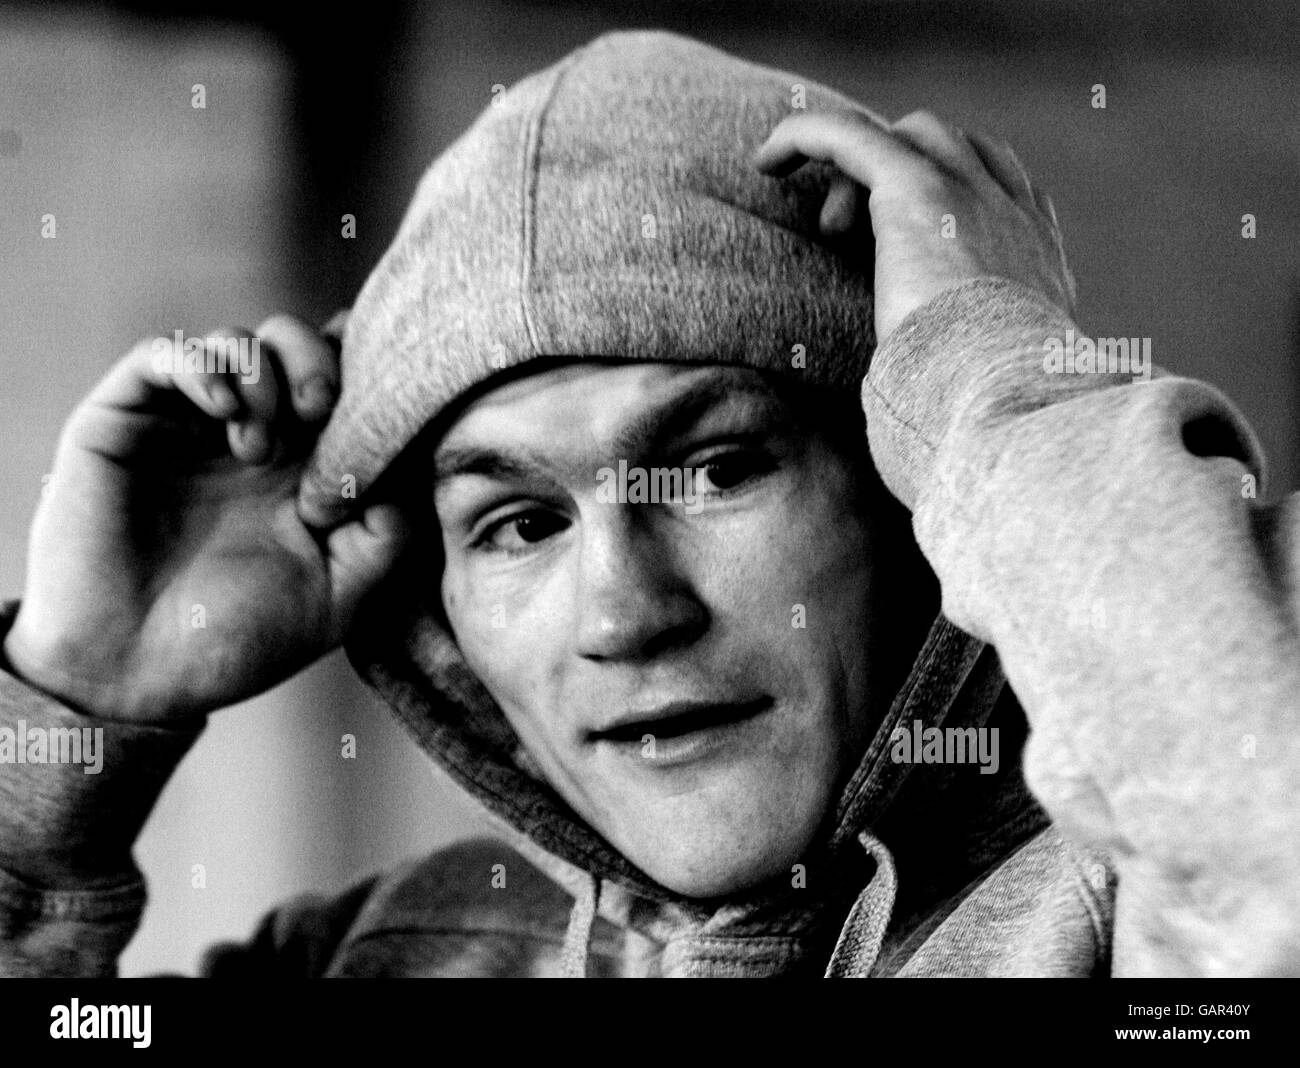 Boxing - Ricky Hatton Media Work Out - Betta Bodies Gym Stock Photo